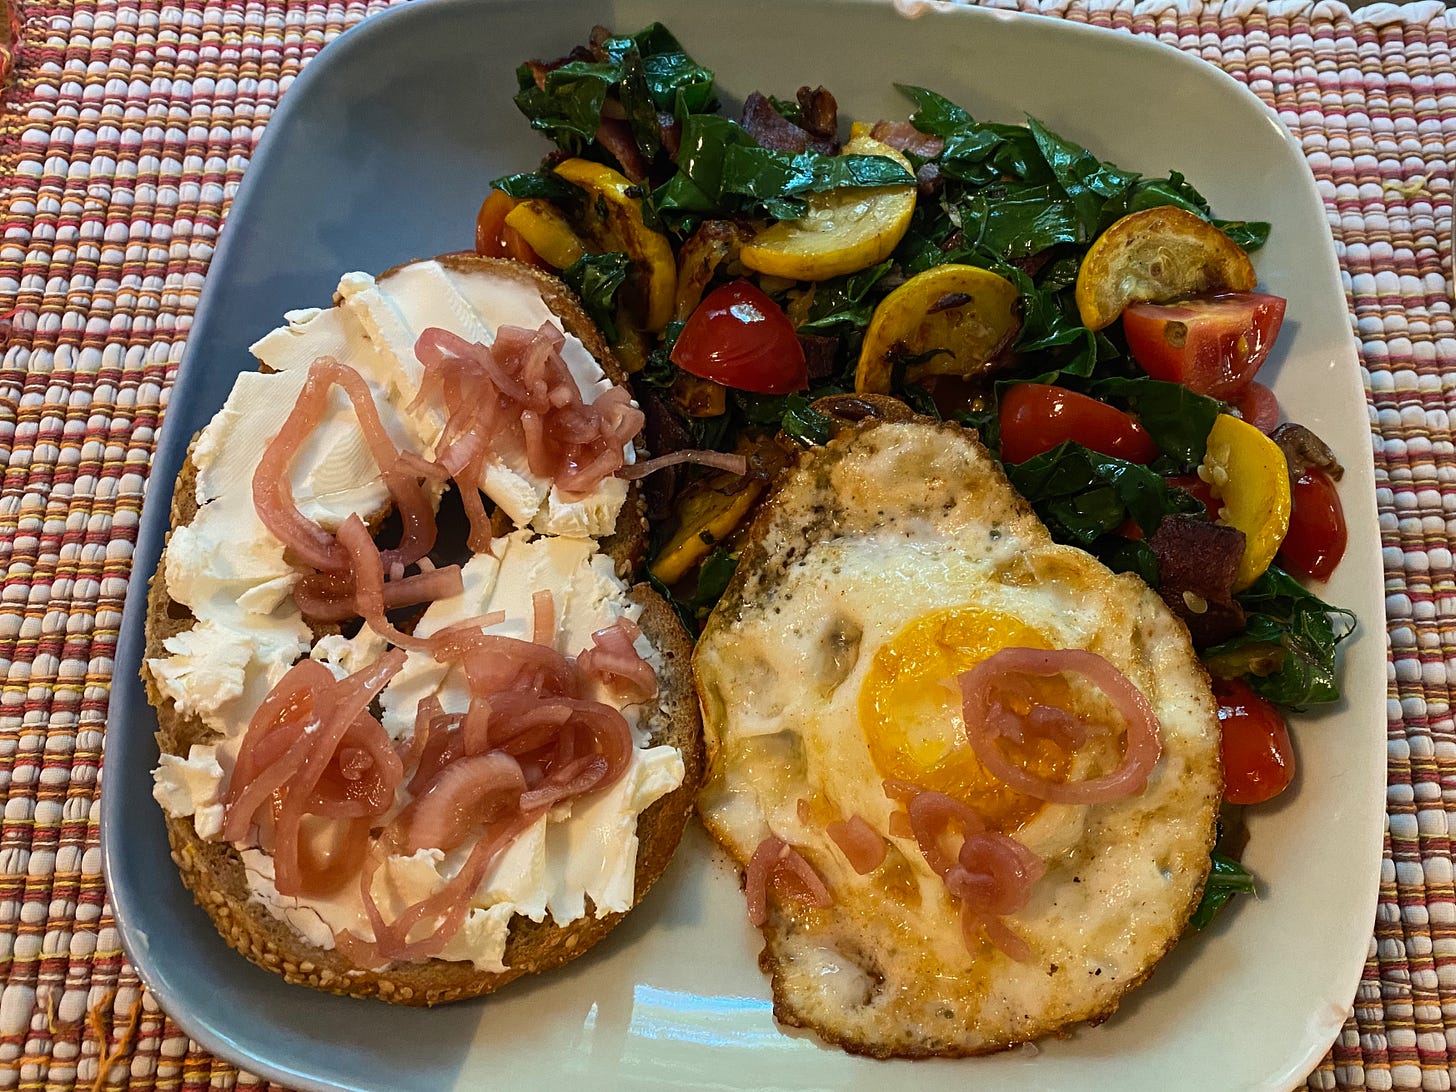 A square plate with a bagel topped with cream cheese and pickled onions, a fried egg, and a pile of sautéd kale with summer squash and chopped cherry tomatoes.